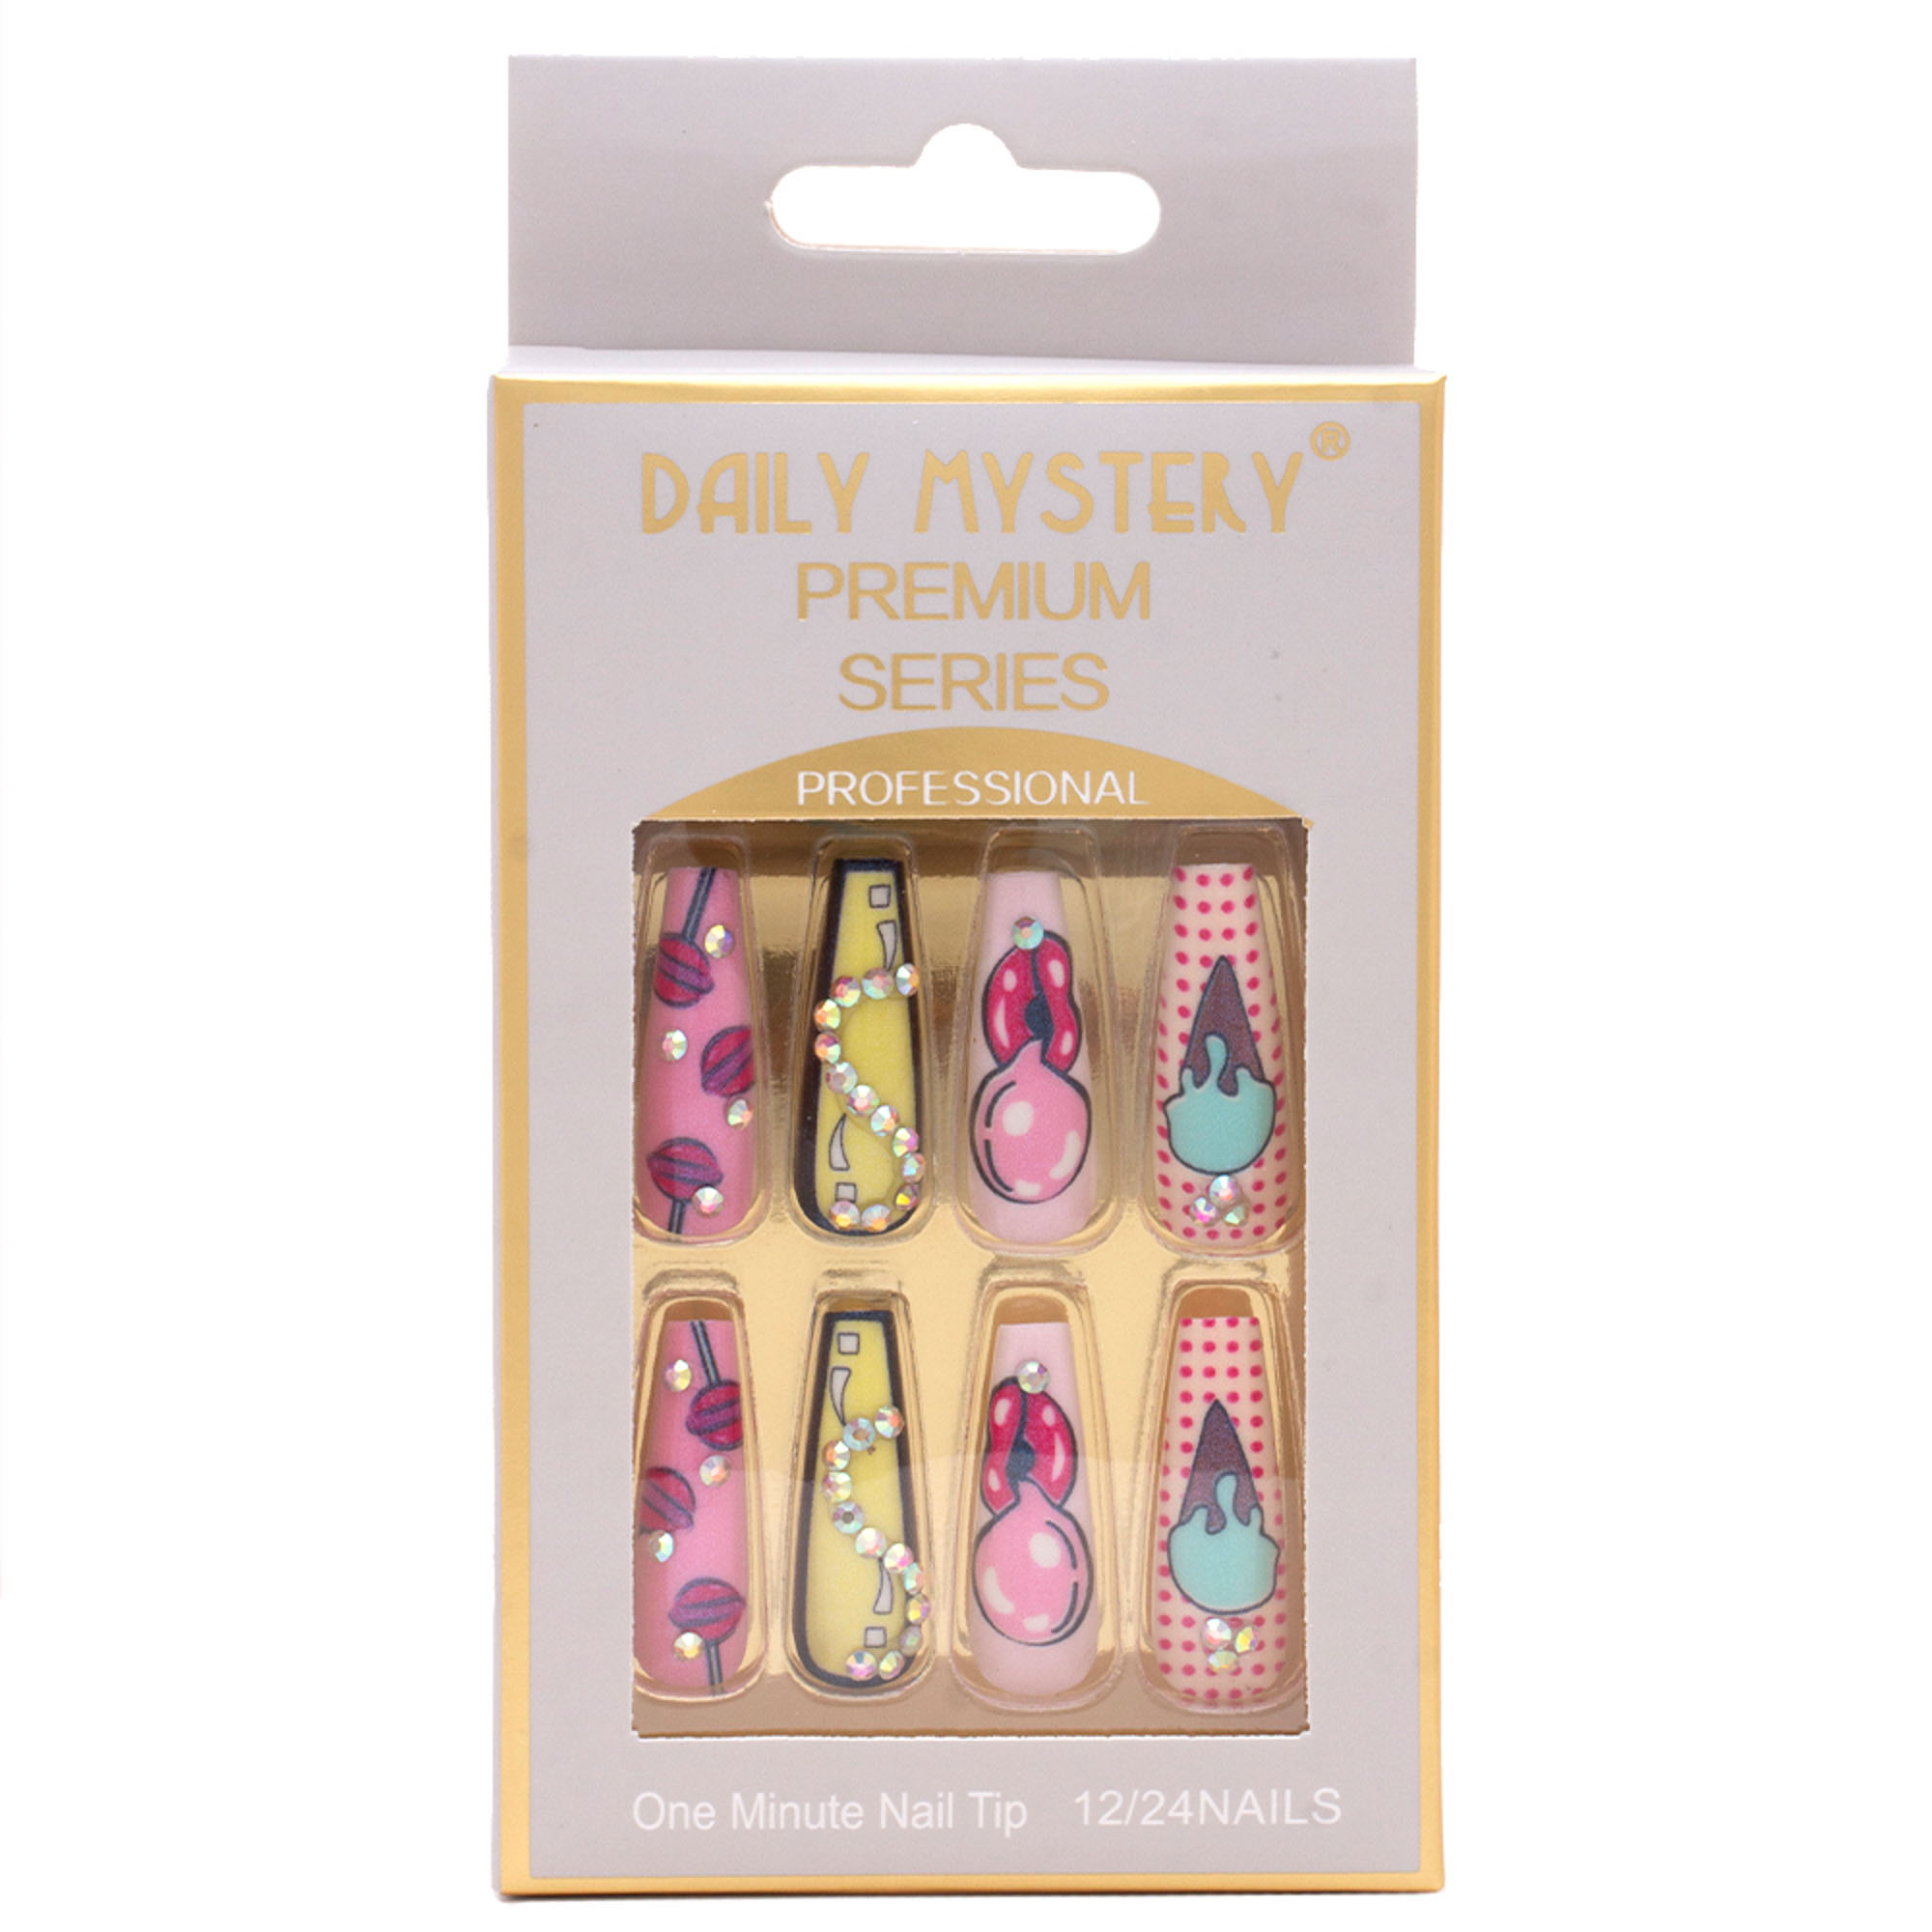 DAILY MYSTERY PREMIUM SERIES PROFESSIONAL NAIL TIP (24 UNITS)